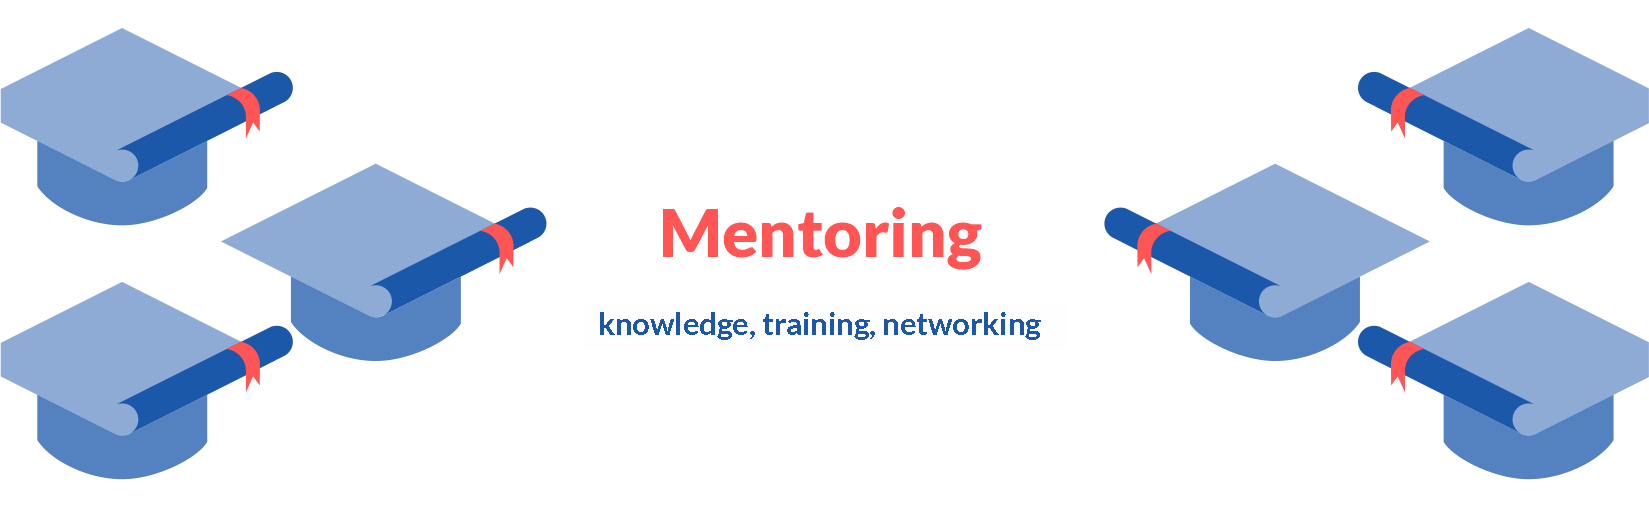 Mentoring - knowledge, training, networking